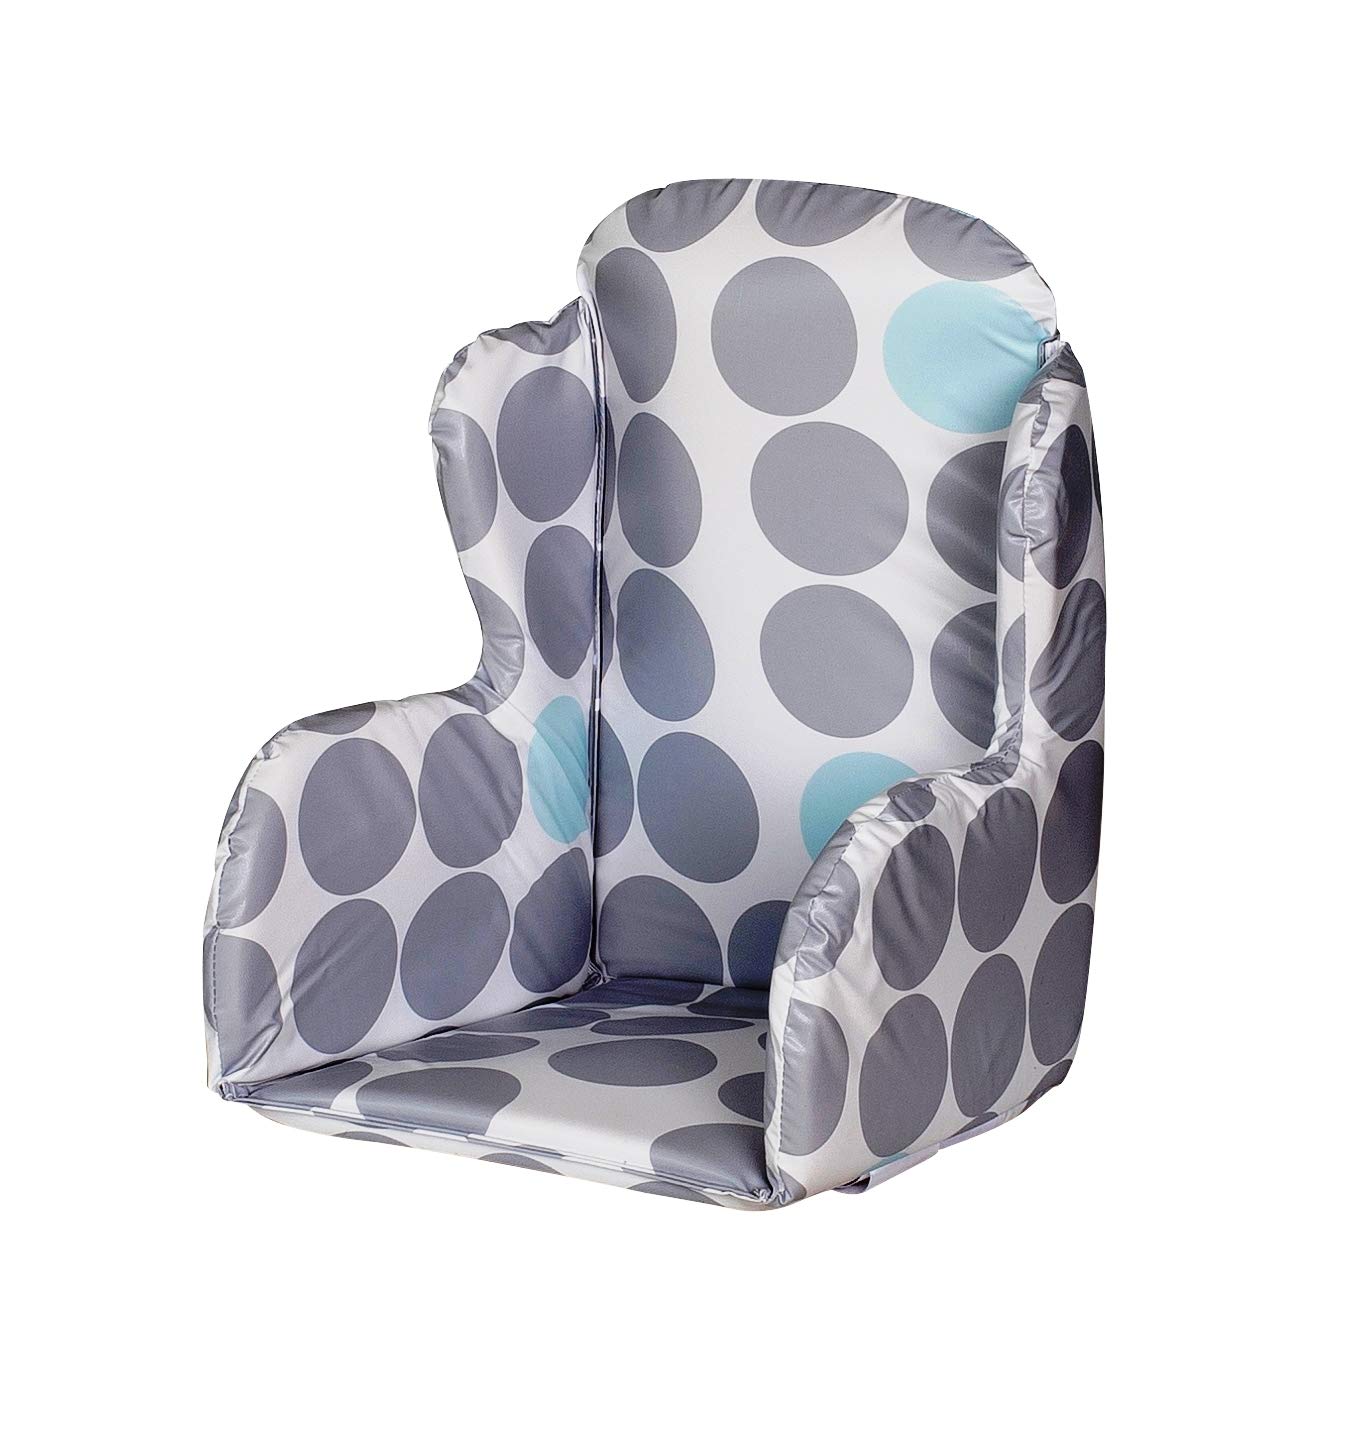 Geuther 4731-13 Fabric Seat Insert for Nico, Mucki and Traveller Dots